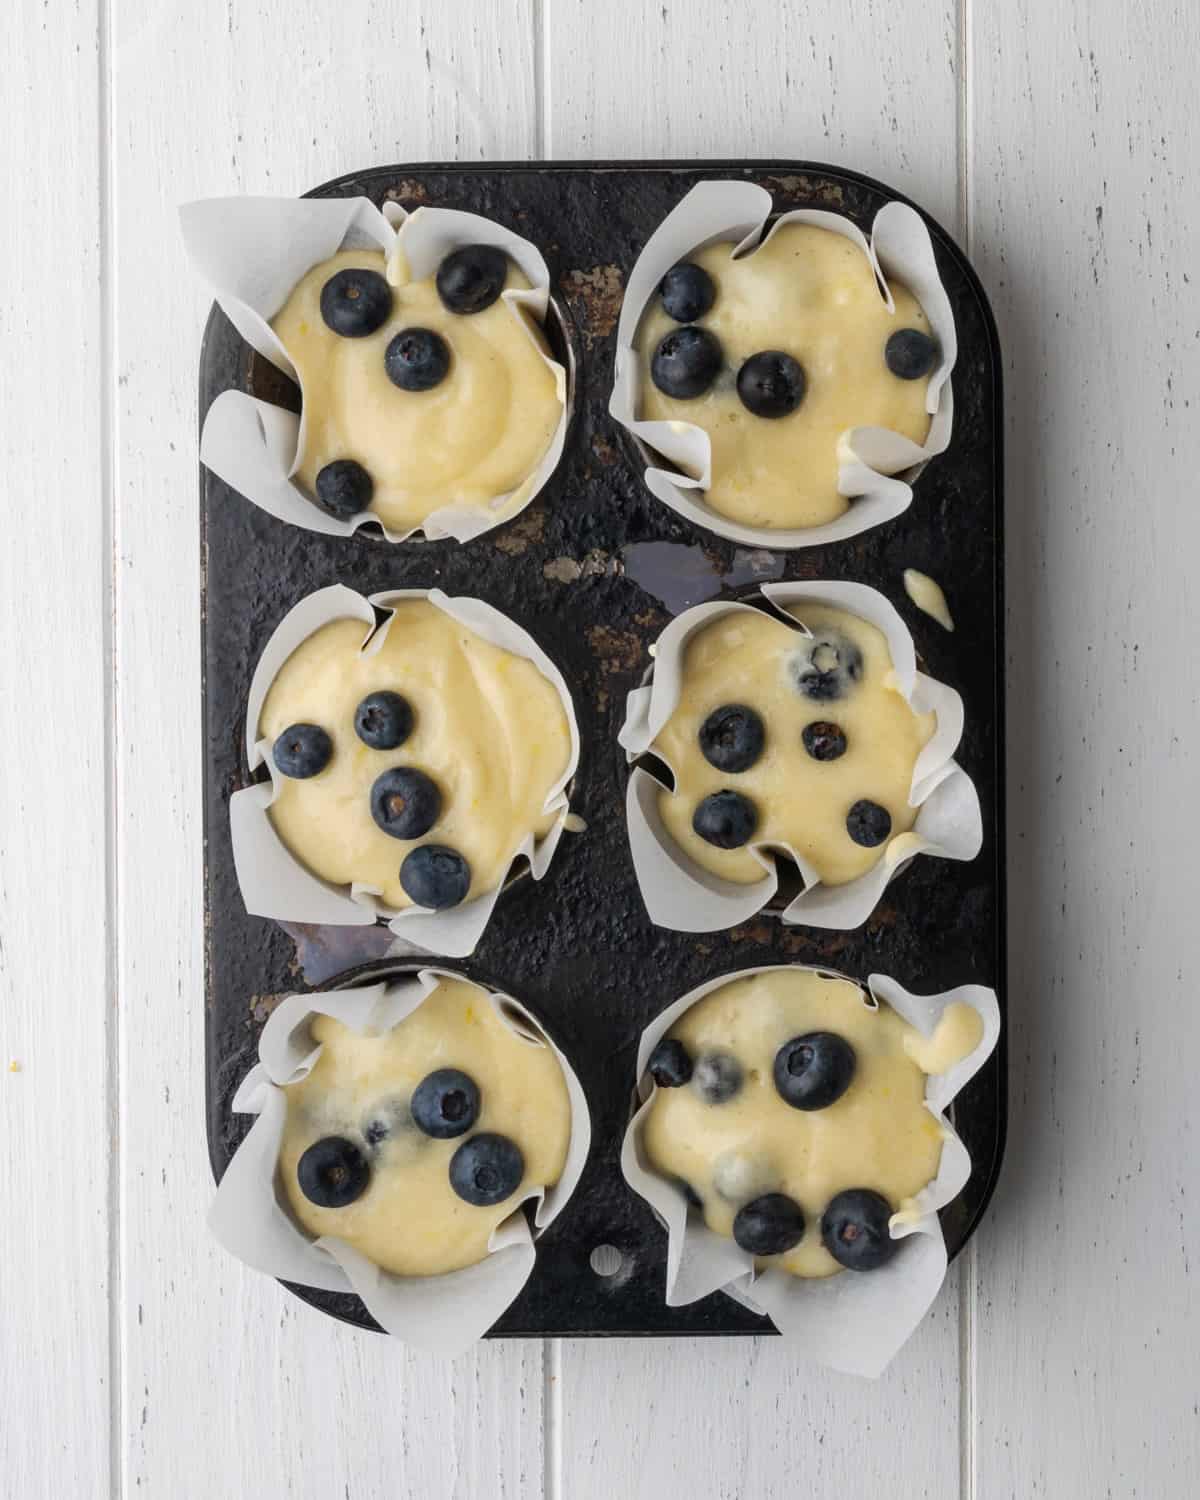 Unbaked muffin batter portioned into a 6 cup muffin tin.